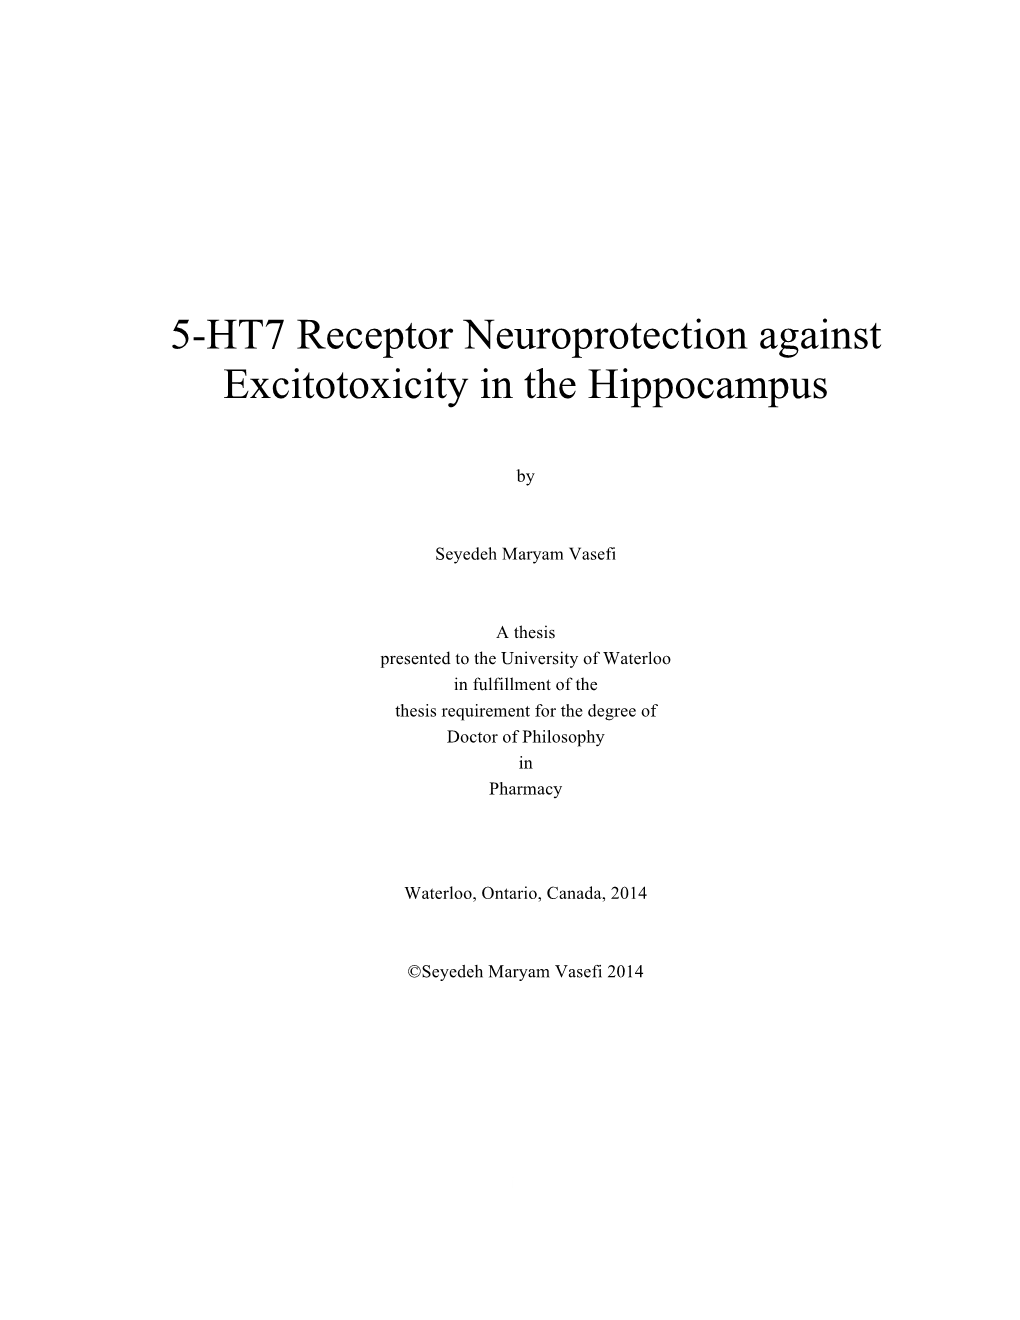 5-HT7 Receptor Neuroprotection Against Excitotoxicity in the Hippocampus,” AFPC, Quebec City, June 2012